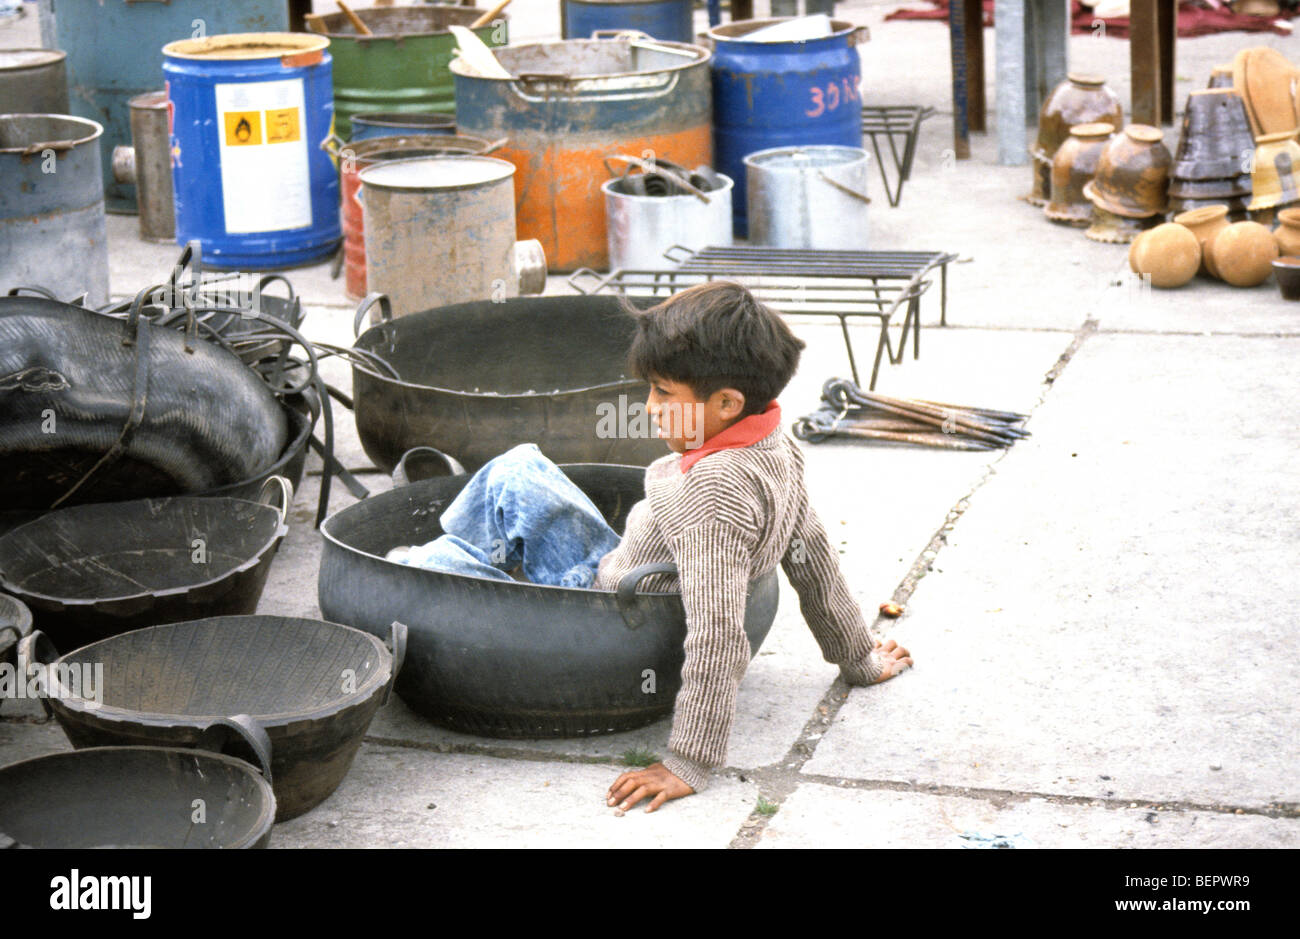 Small boy sitting in basket made from a recycled car tire. Stock Photo